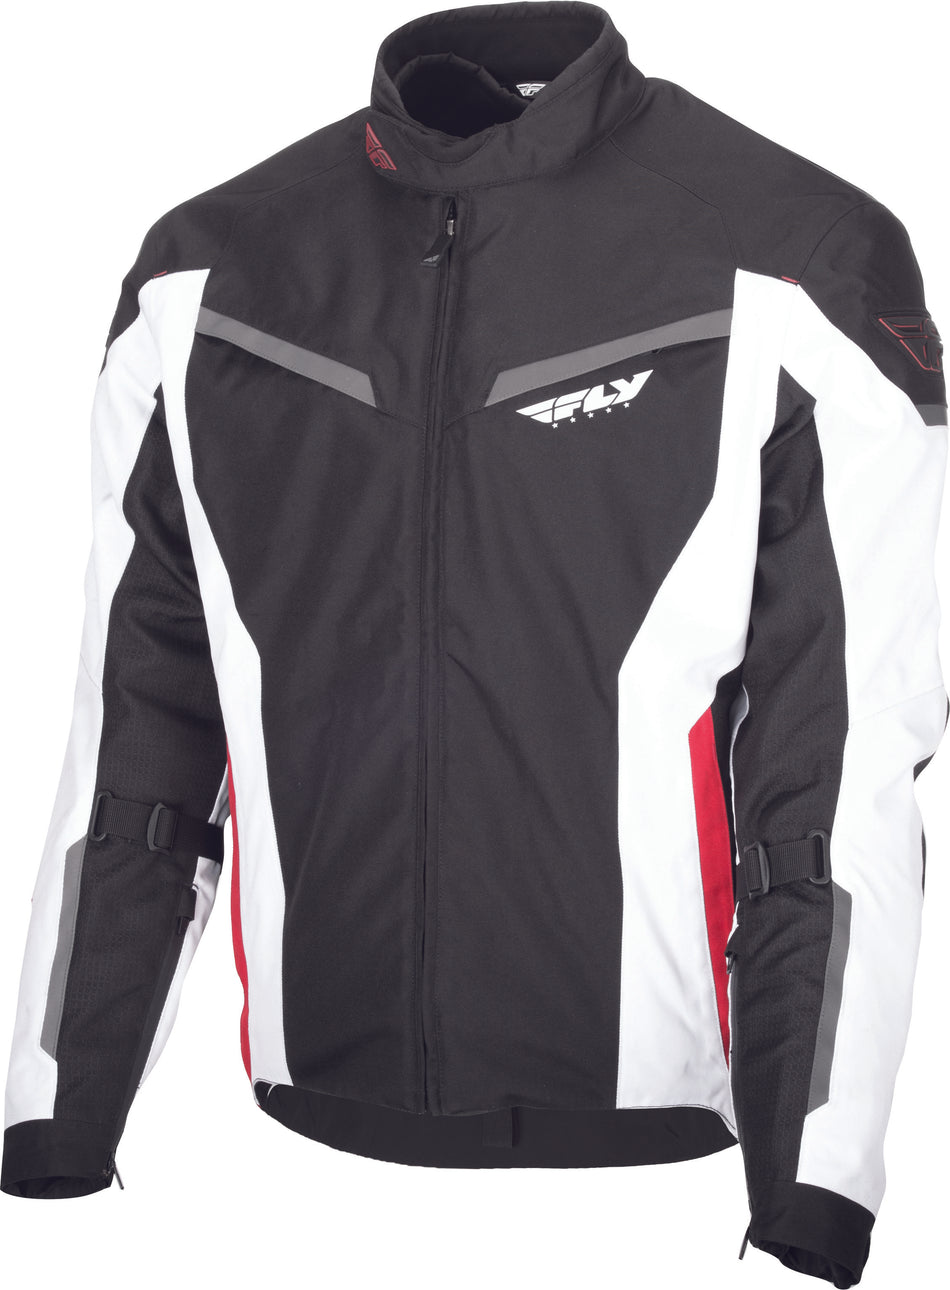 FLY RACING Strata Jacket Black/White/Red Xl 477-2101-5